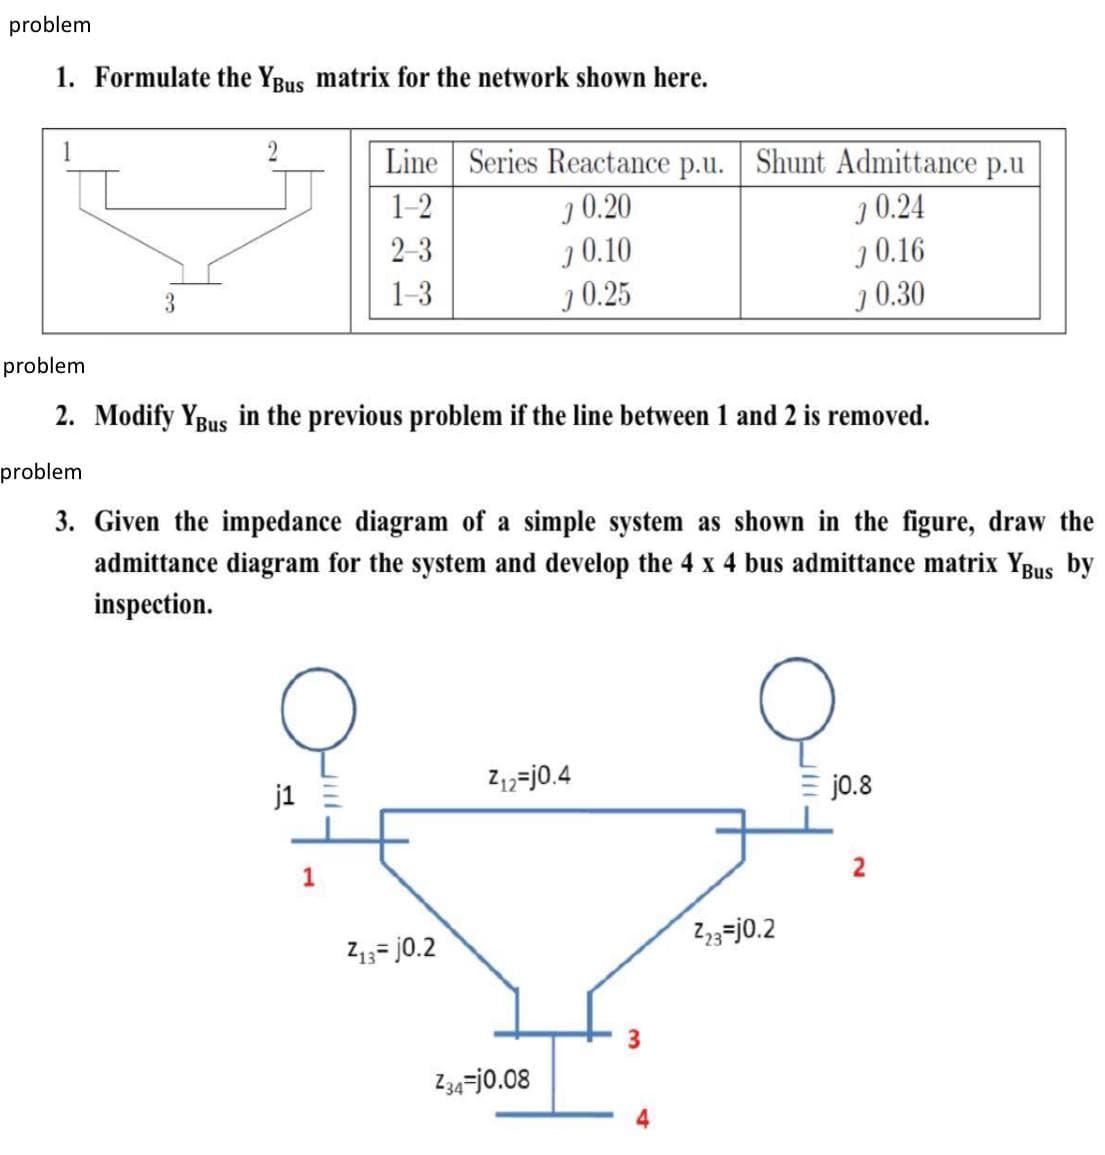 problem
1. Formulate the YBus matrix for the network shown here.
Line Series Reactance p.u. Shunt Admittance
p.u
1-2
1 0.20
) 0.10
I 0.25
1 0.24
1 0.16
1 0.30
2-3
3
1-3
problem
2. Modify YBus in the previous problem if the line between 1 and 2 is removed.
problem
3. Given the impedance diagram of a simple system as shown in the figure, draw the
admittance diagram for the system and develop the 4 x 4 bus admittance matrix YBus by
inspection.
j1 E
Z12=j0.4
= jo.8
1
Z13= j0.2
Z;3=j0.2
3.
Z34=j0.08
